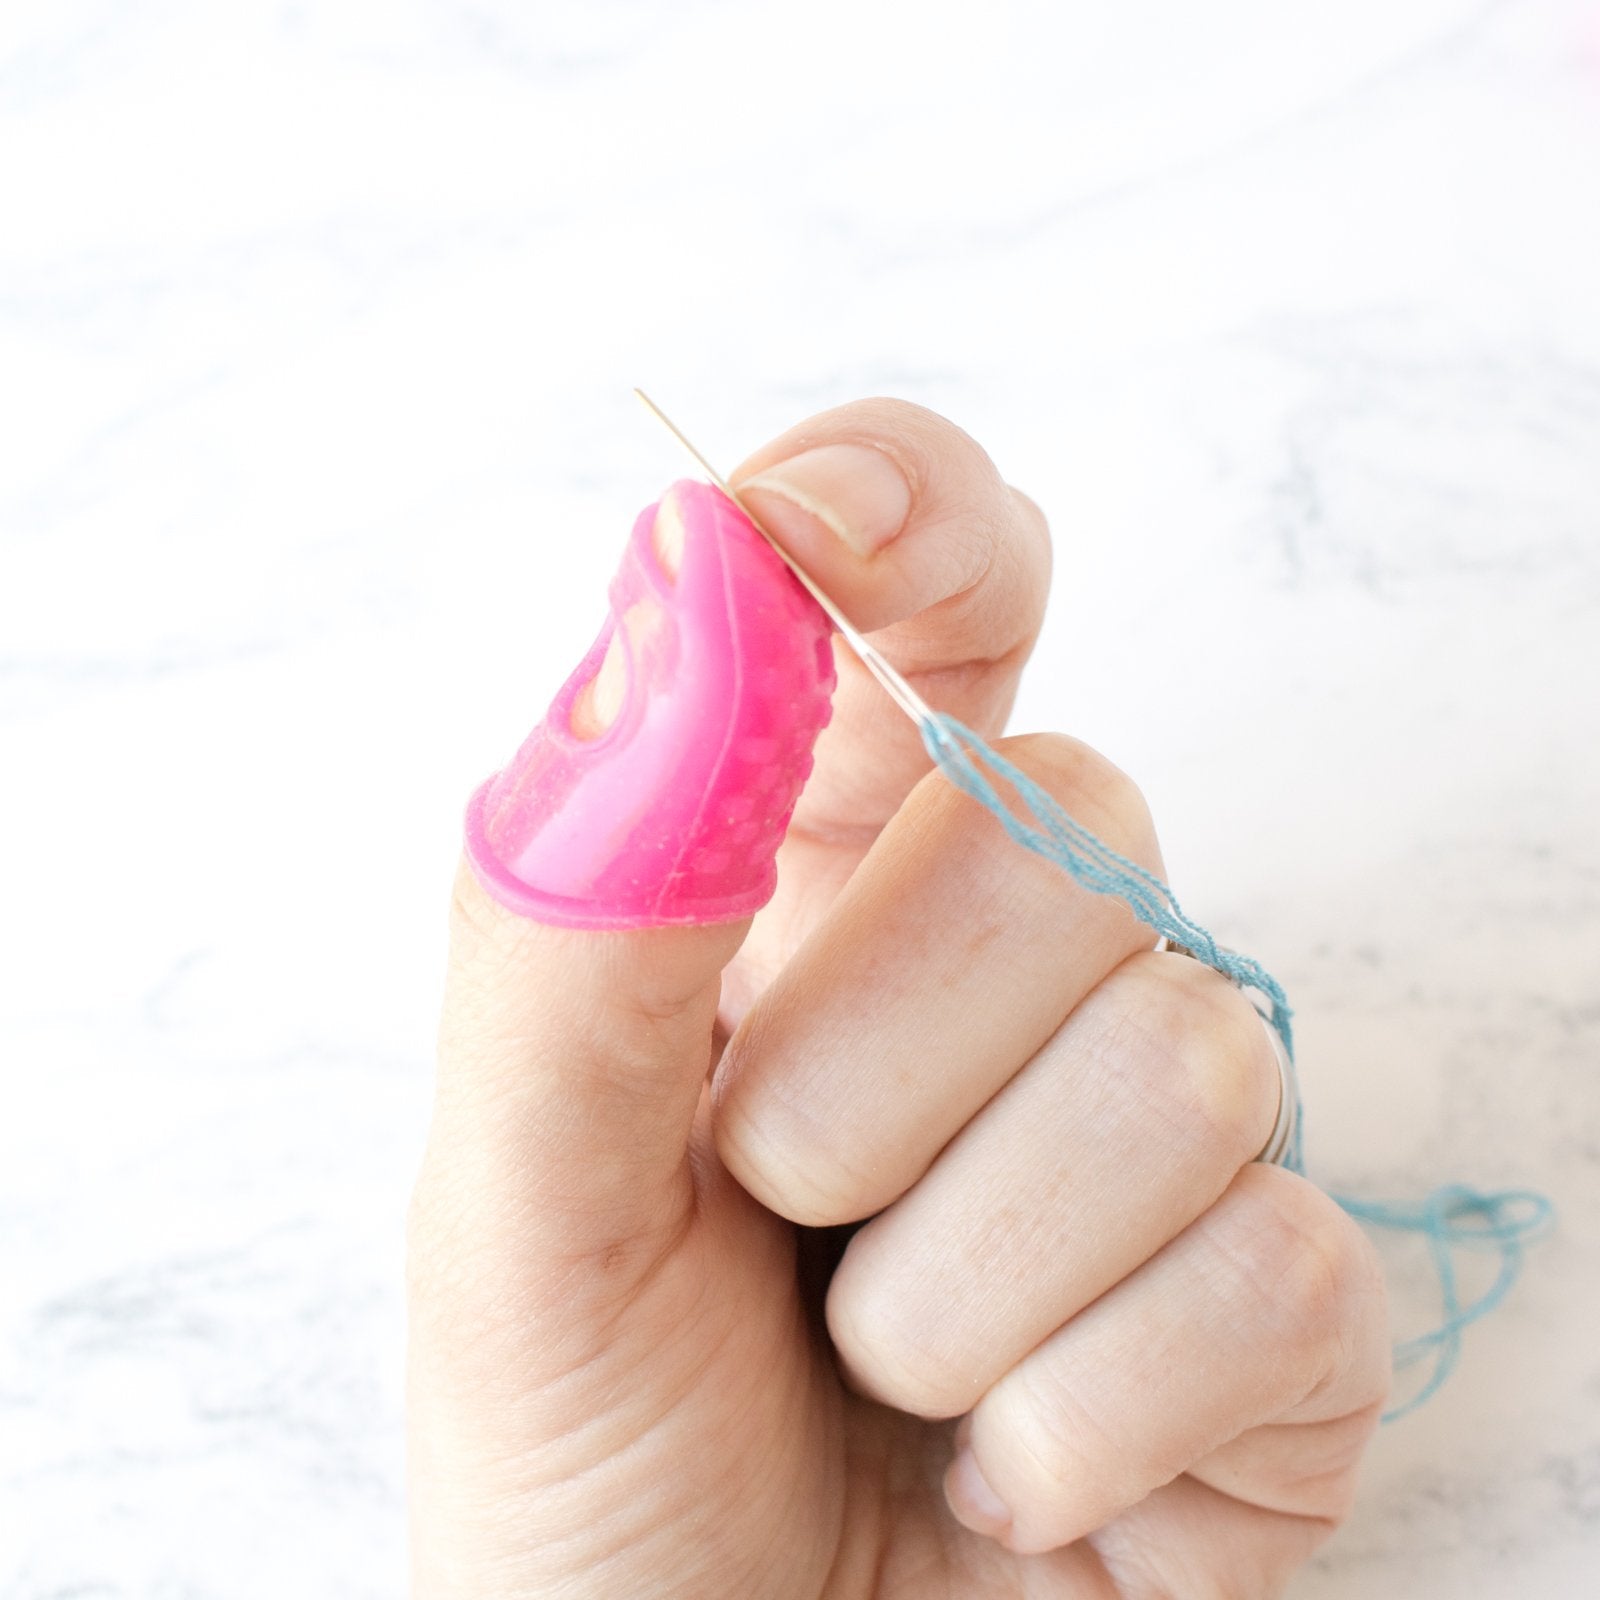 Lightweight and Flexible Rubber Thimble - Stitched Modern